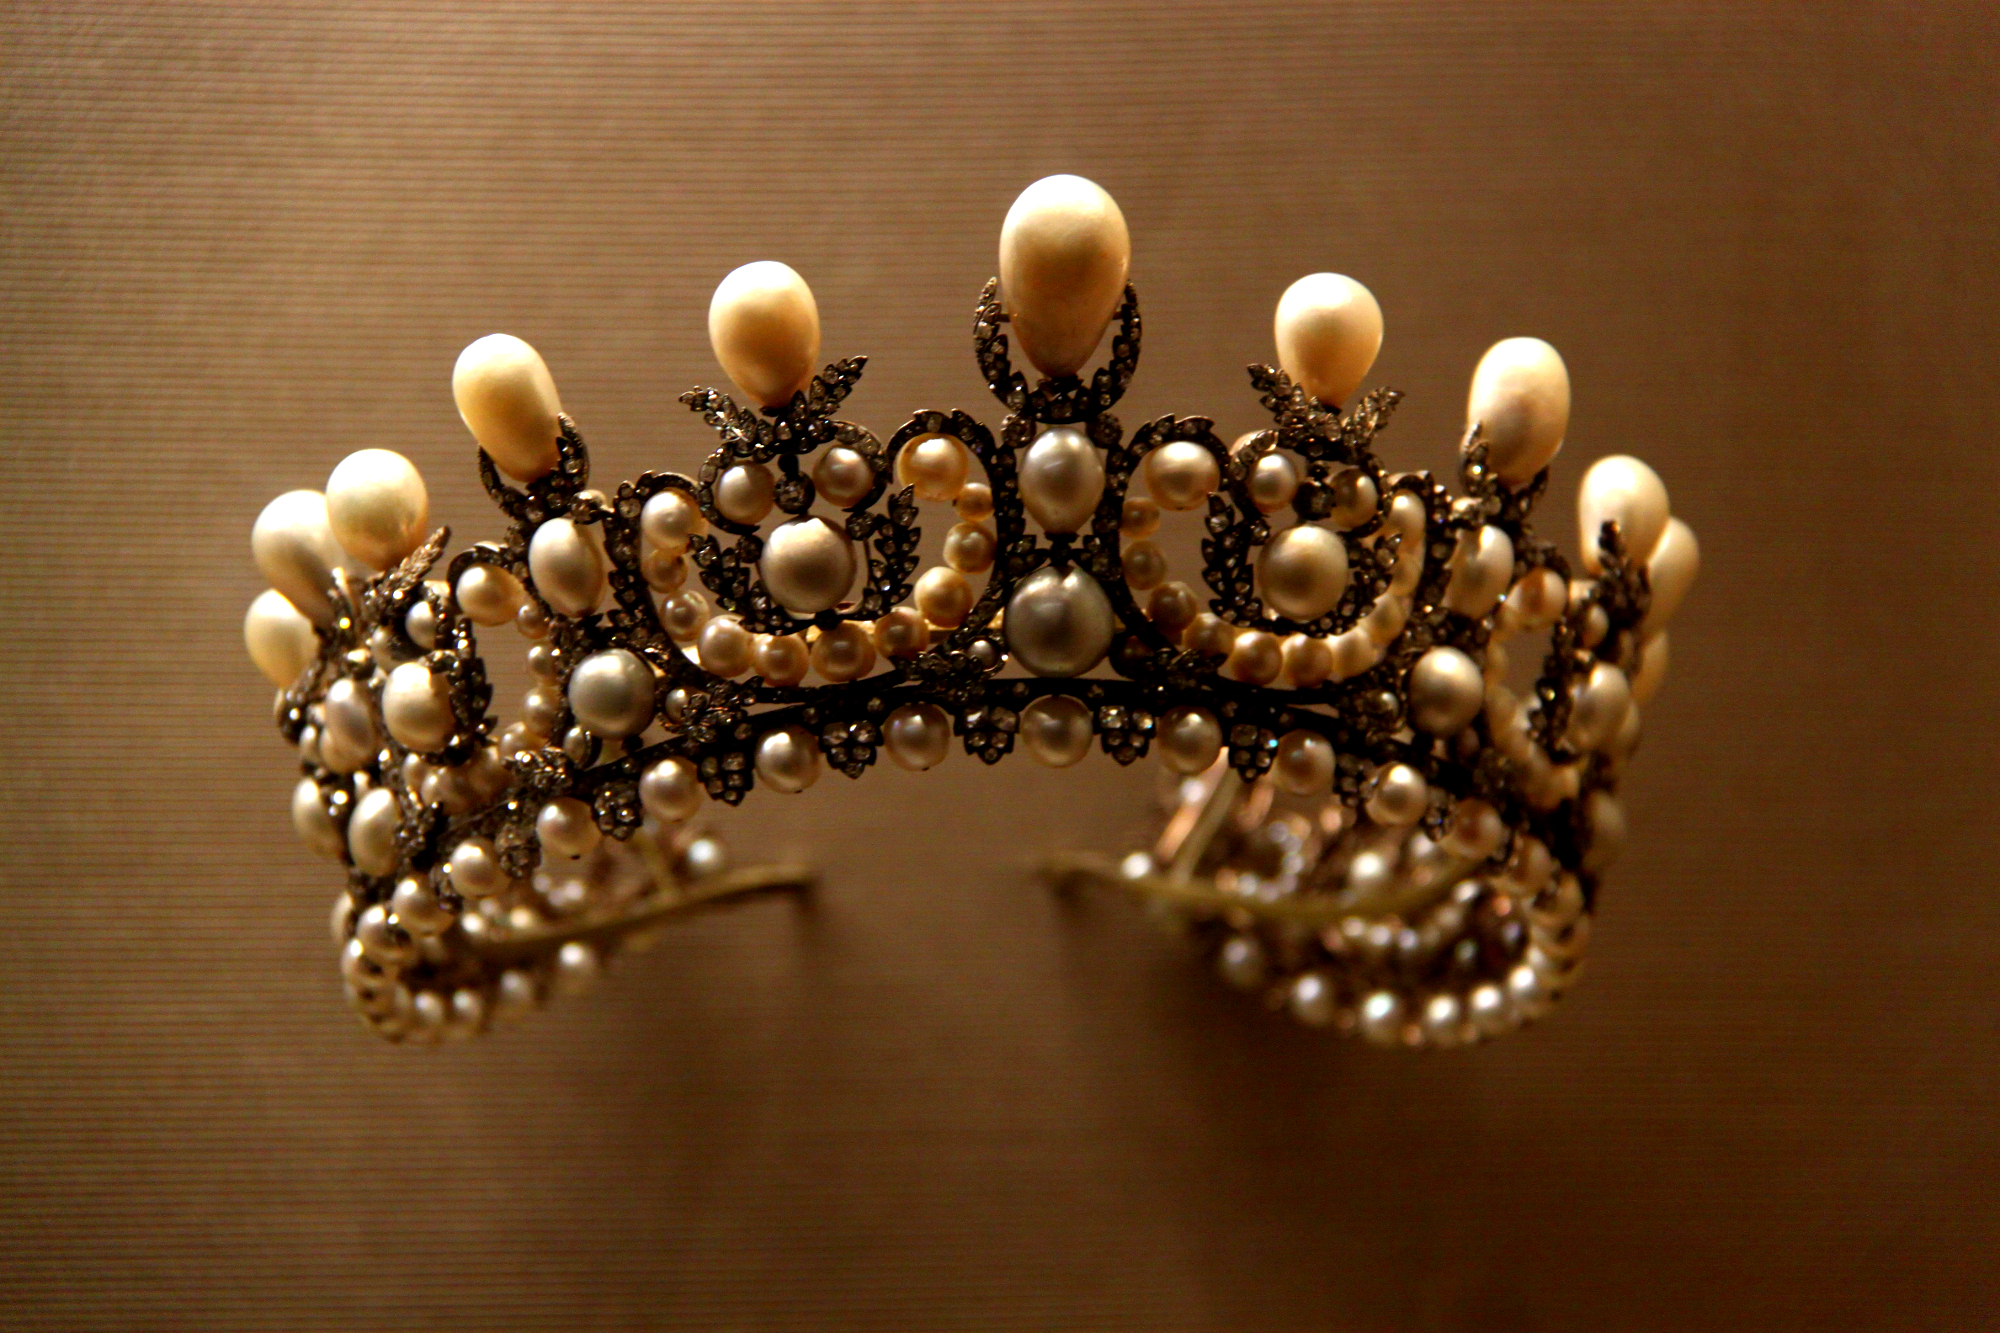 Princesses’ Jewelries exhibited at the Louvre Museum